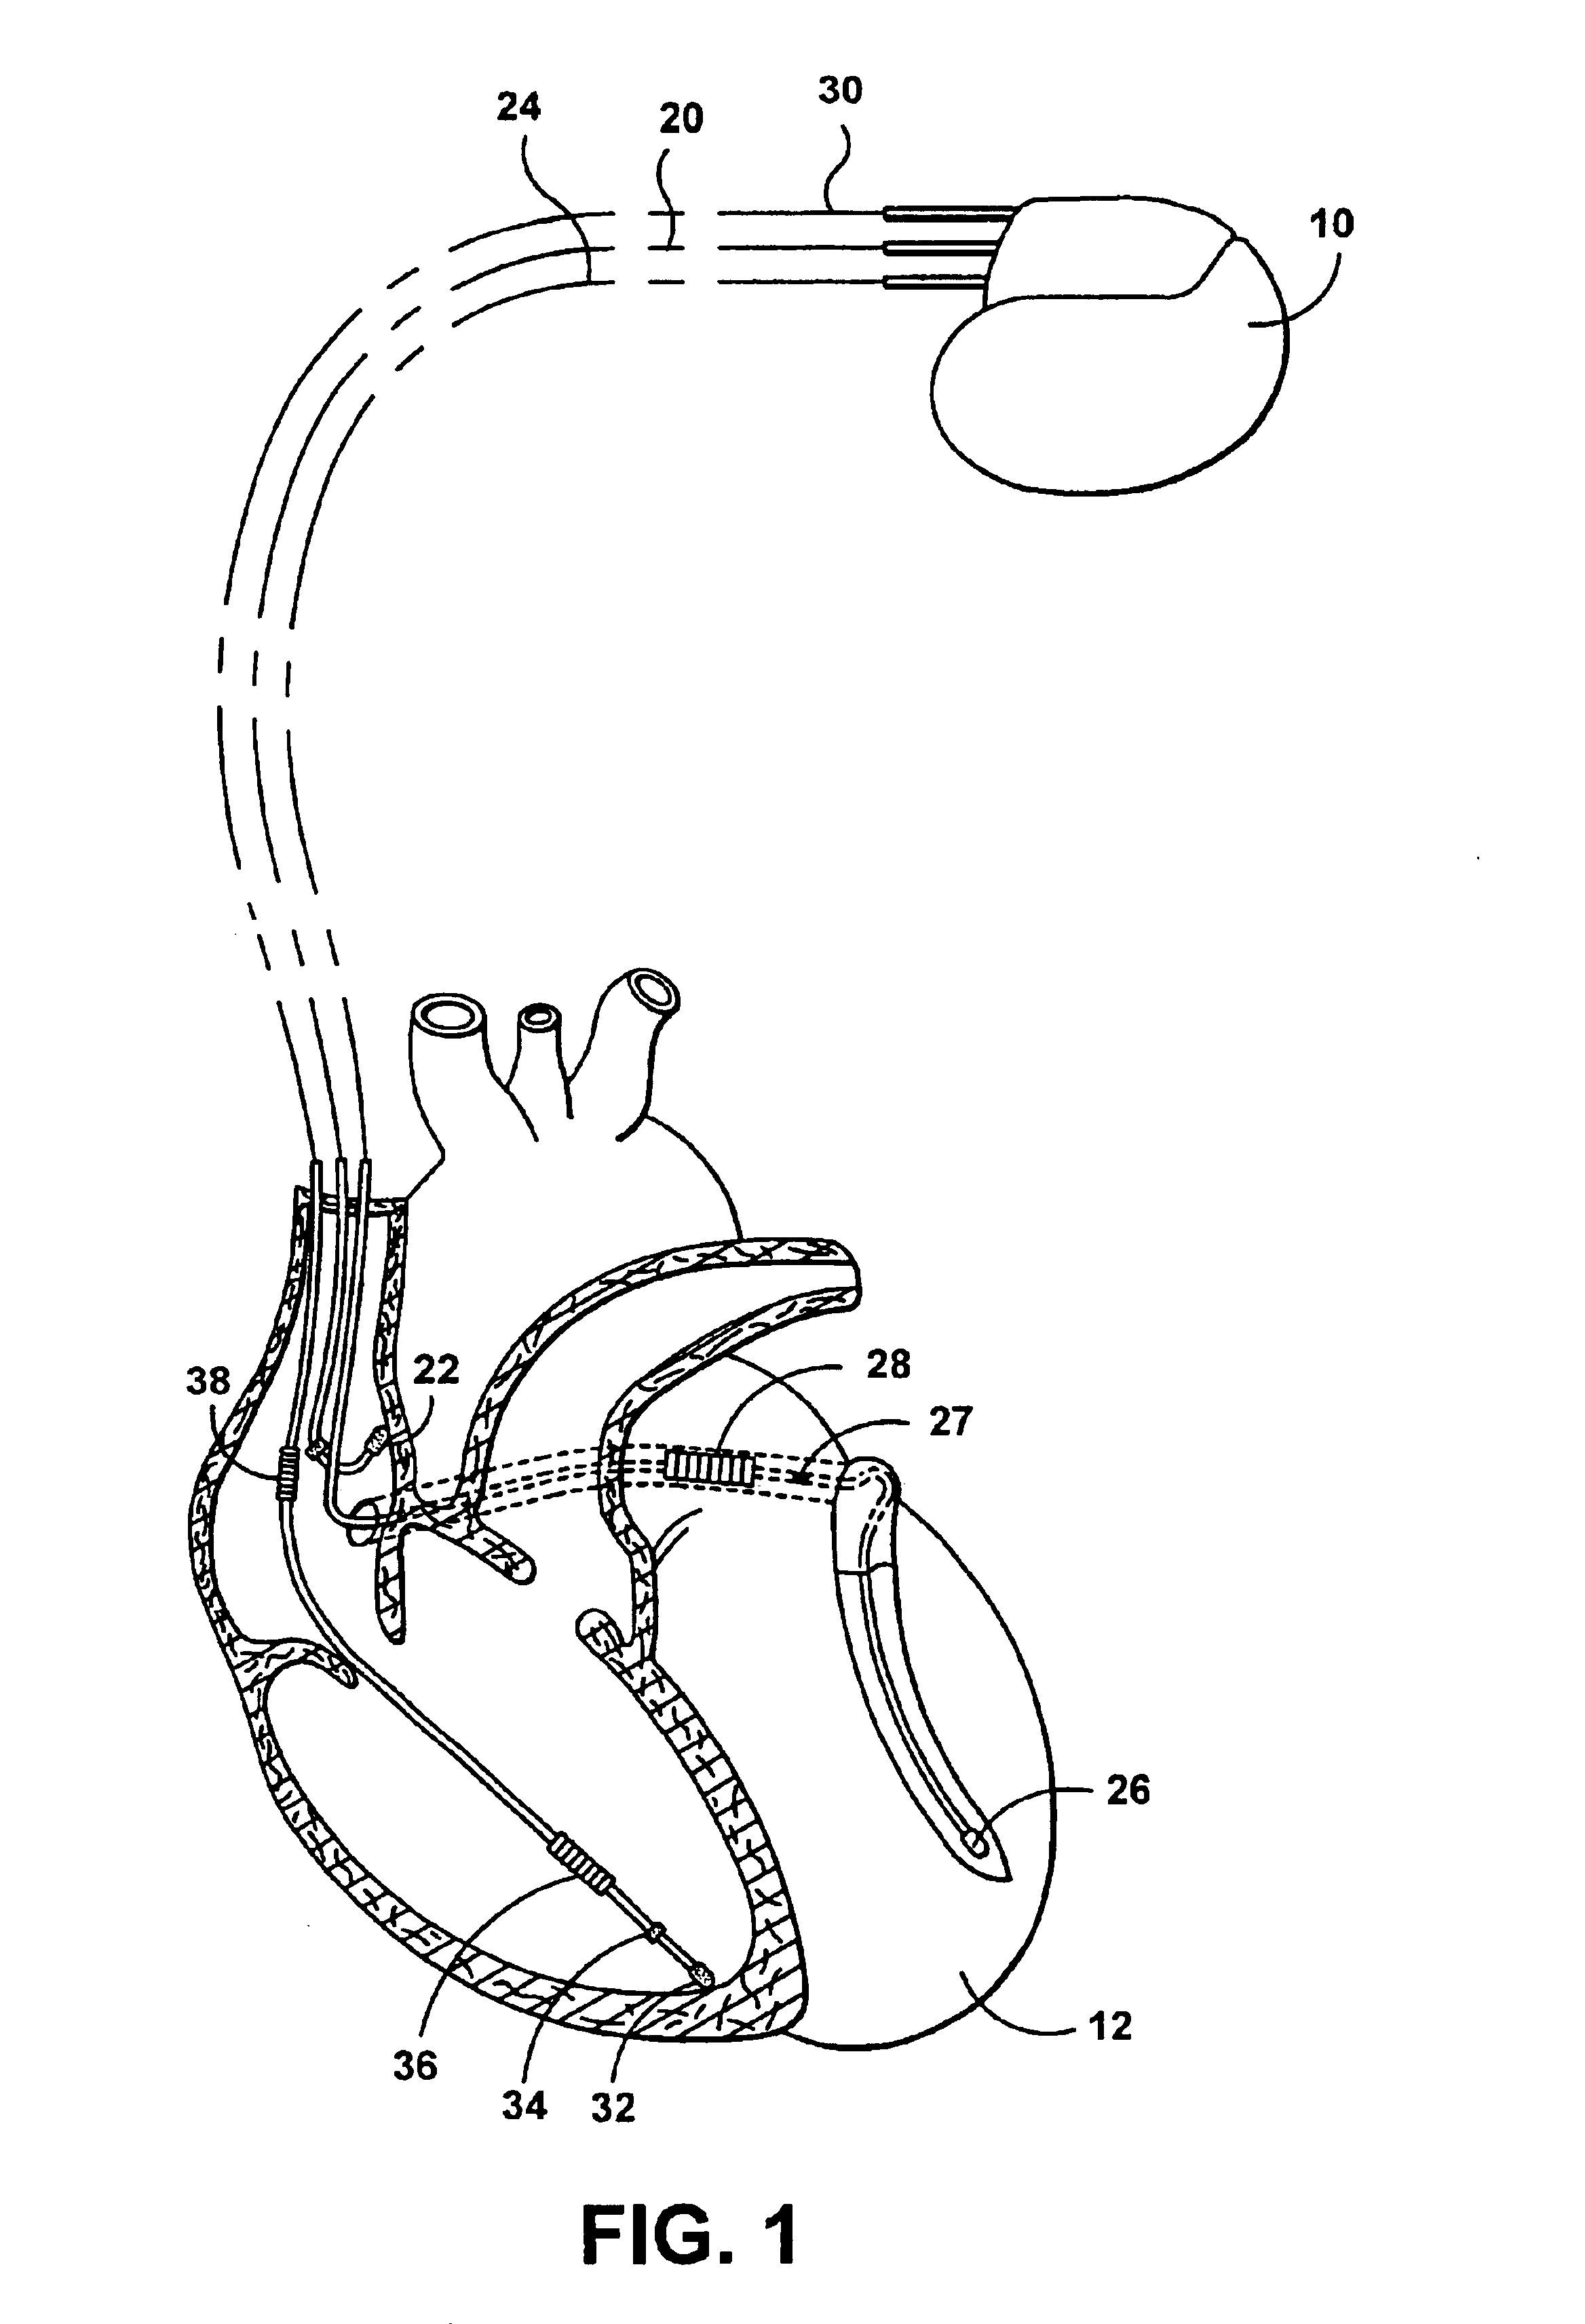 Method and apparatus for electrophysiological testing in an implantable device